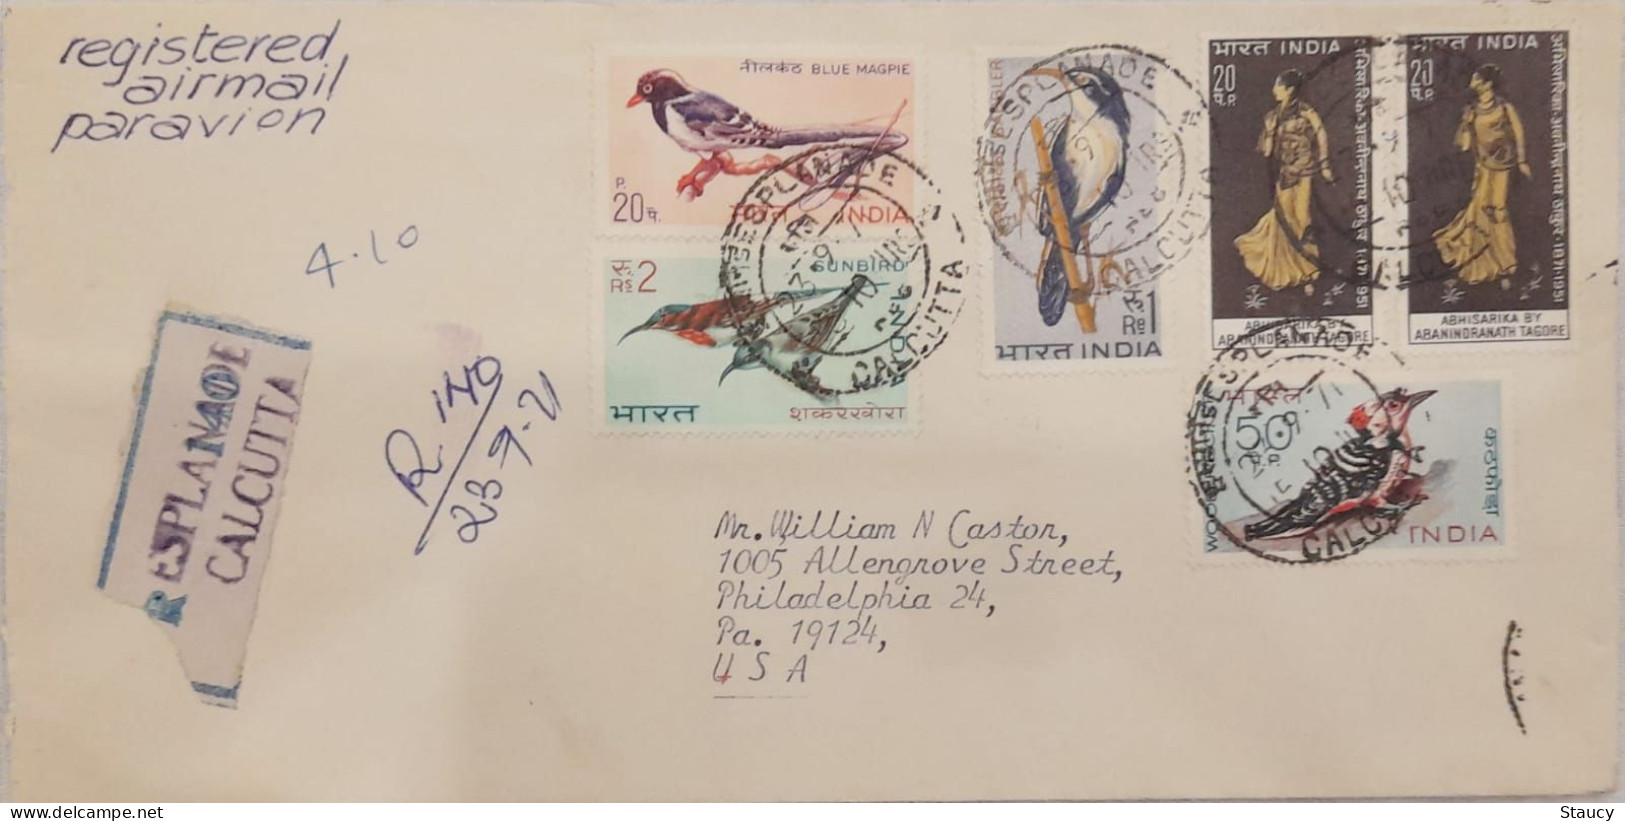 India 1968 BIRDS~Wildlife Preservation - Fauna / Birds Complete Set Of 4 Stamps USED On Registered Cover To USA As Scan - Airmail